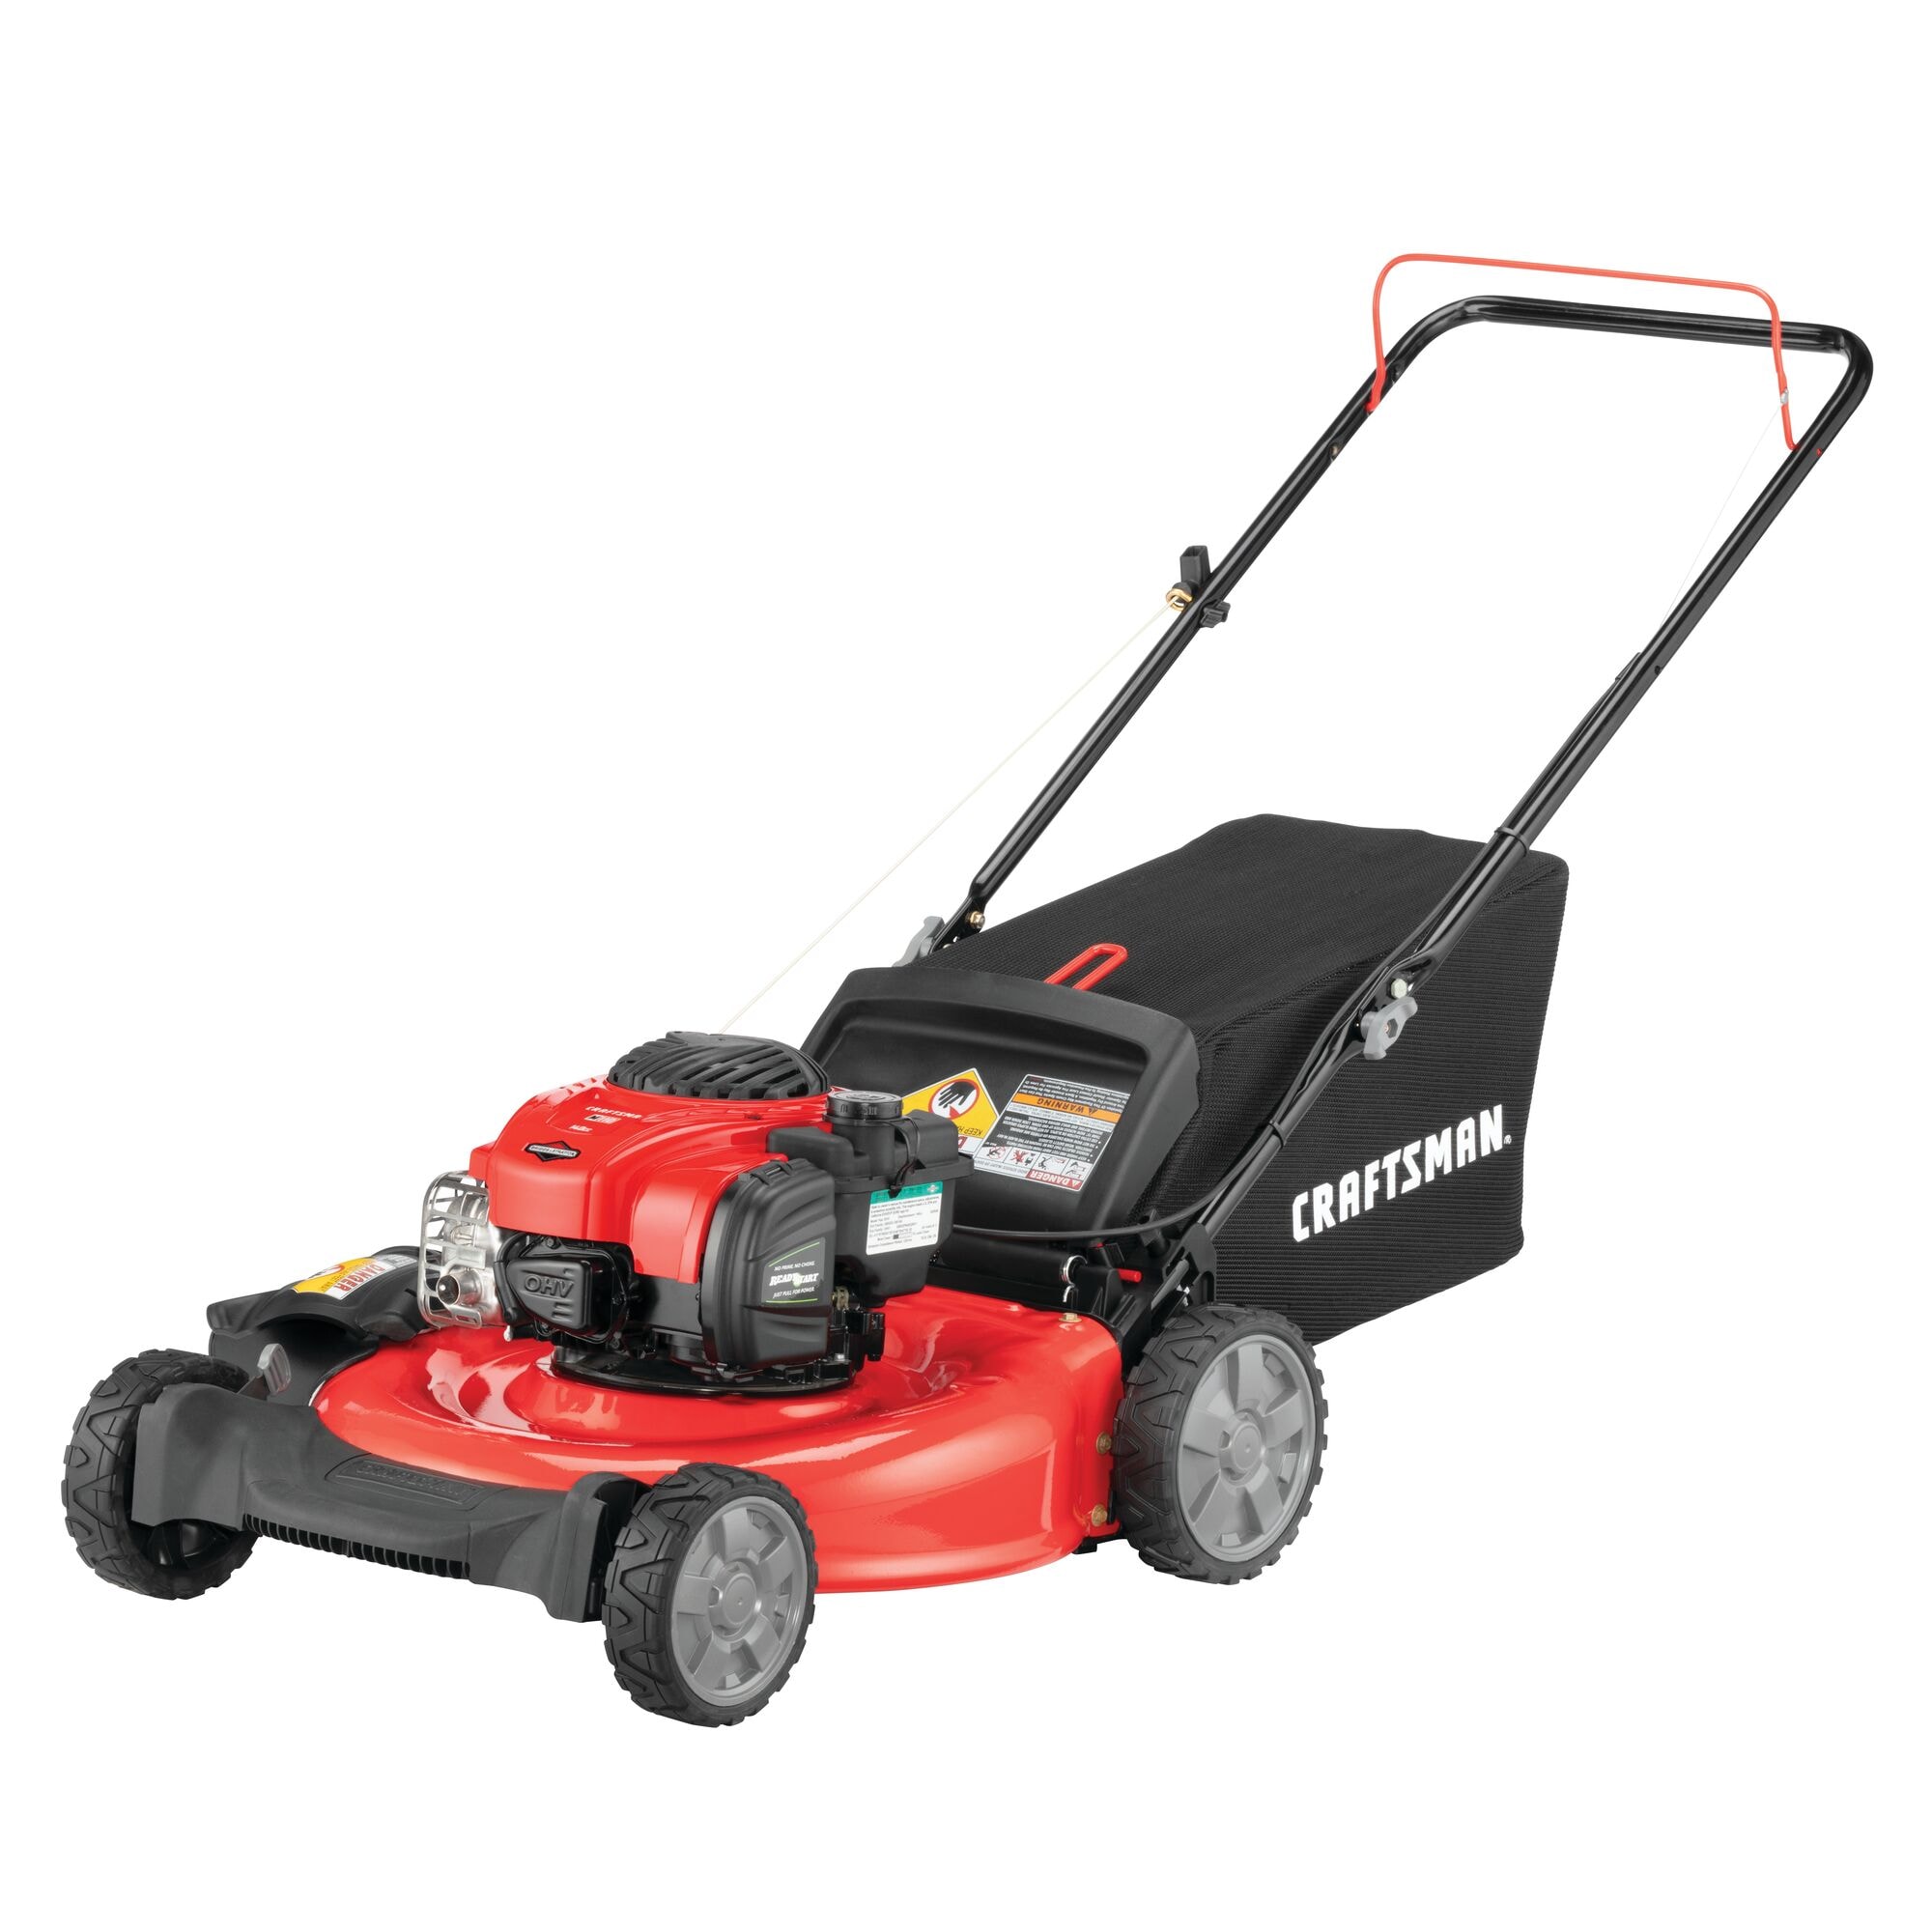 CRAFTSMAN M110 140-cc 21-in Push Gas Lawn Mower with Briggs & Stratton  Engine at